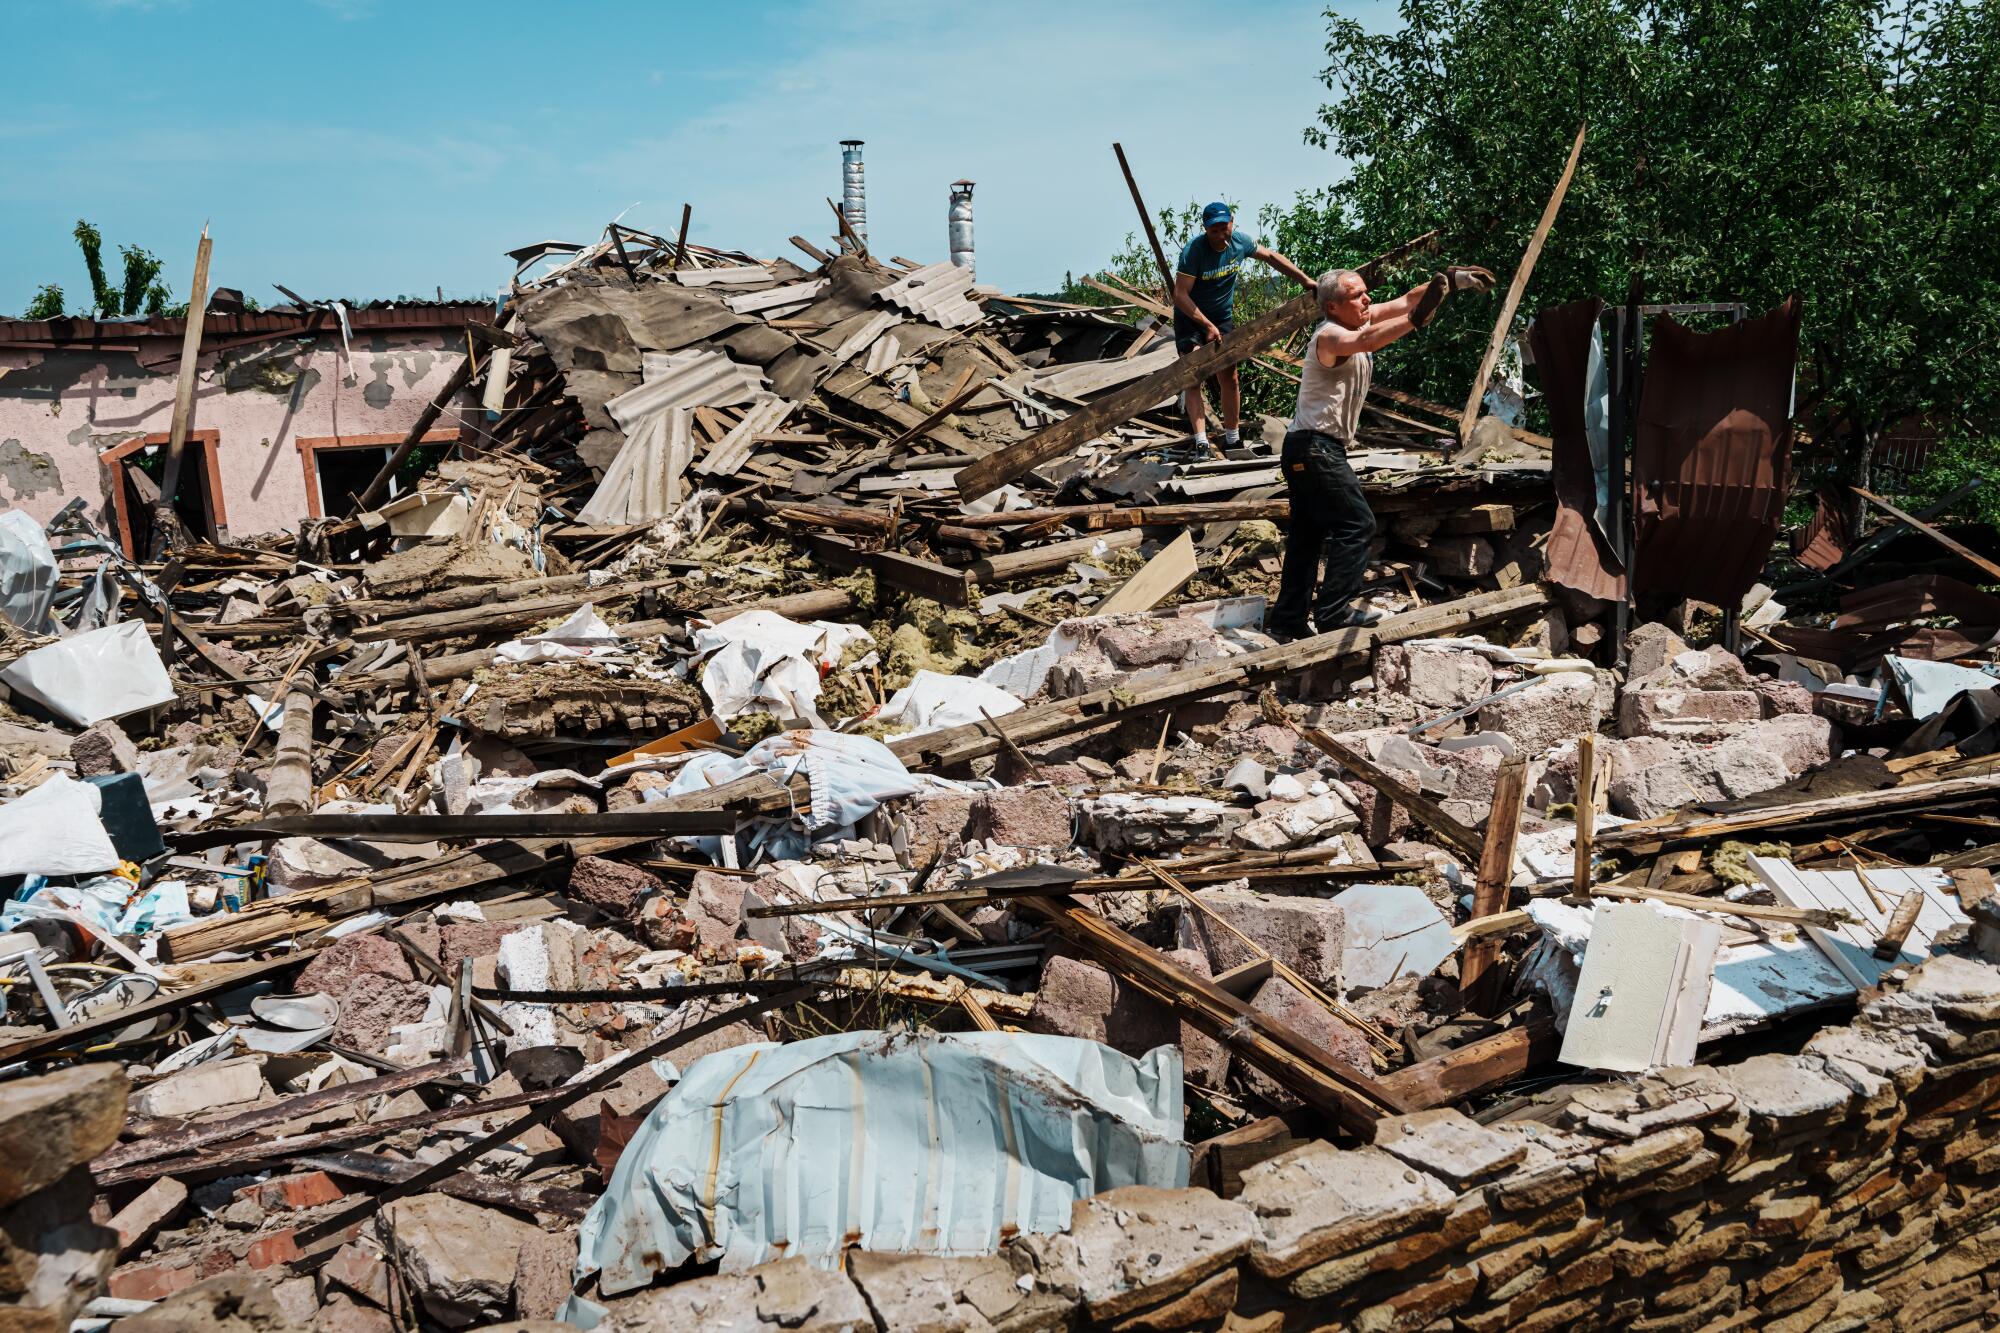 Local residents clear out debris after a bombardment destroyed a house in the outskirts of Slovyansk, Ukraine.